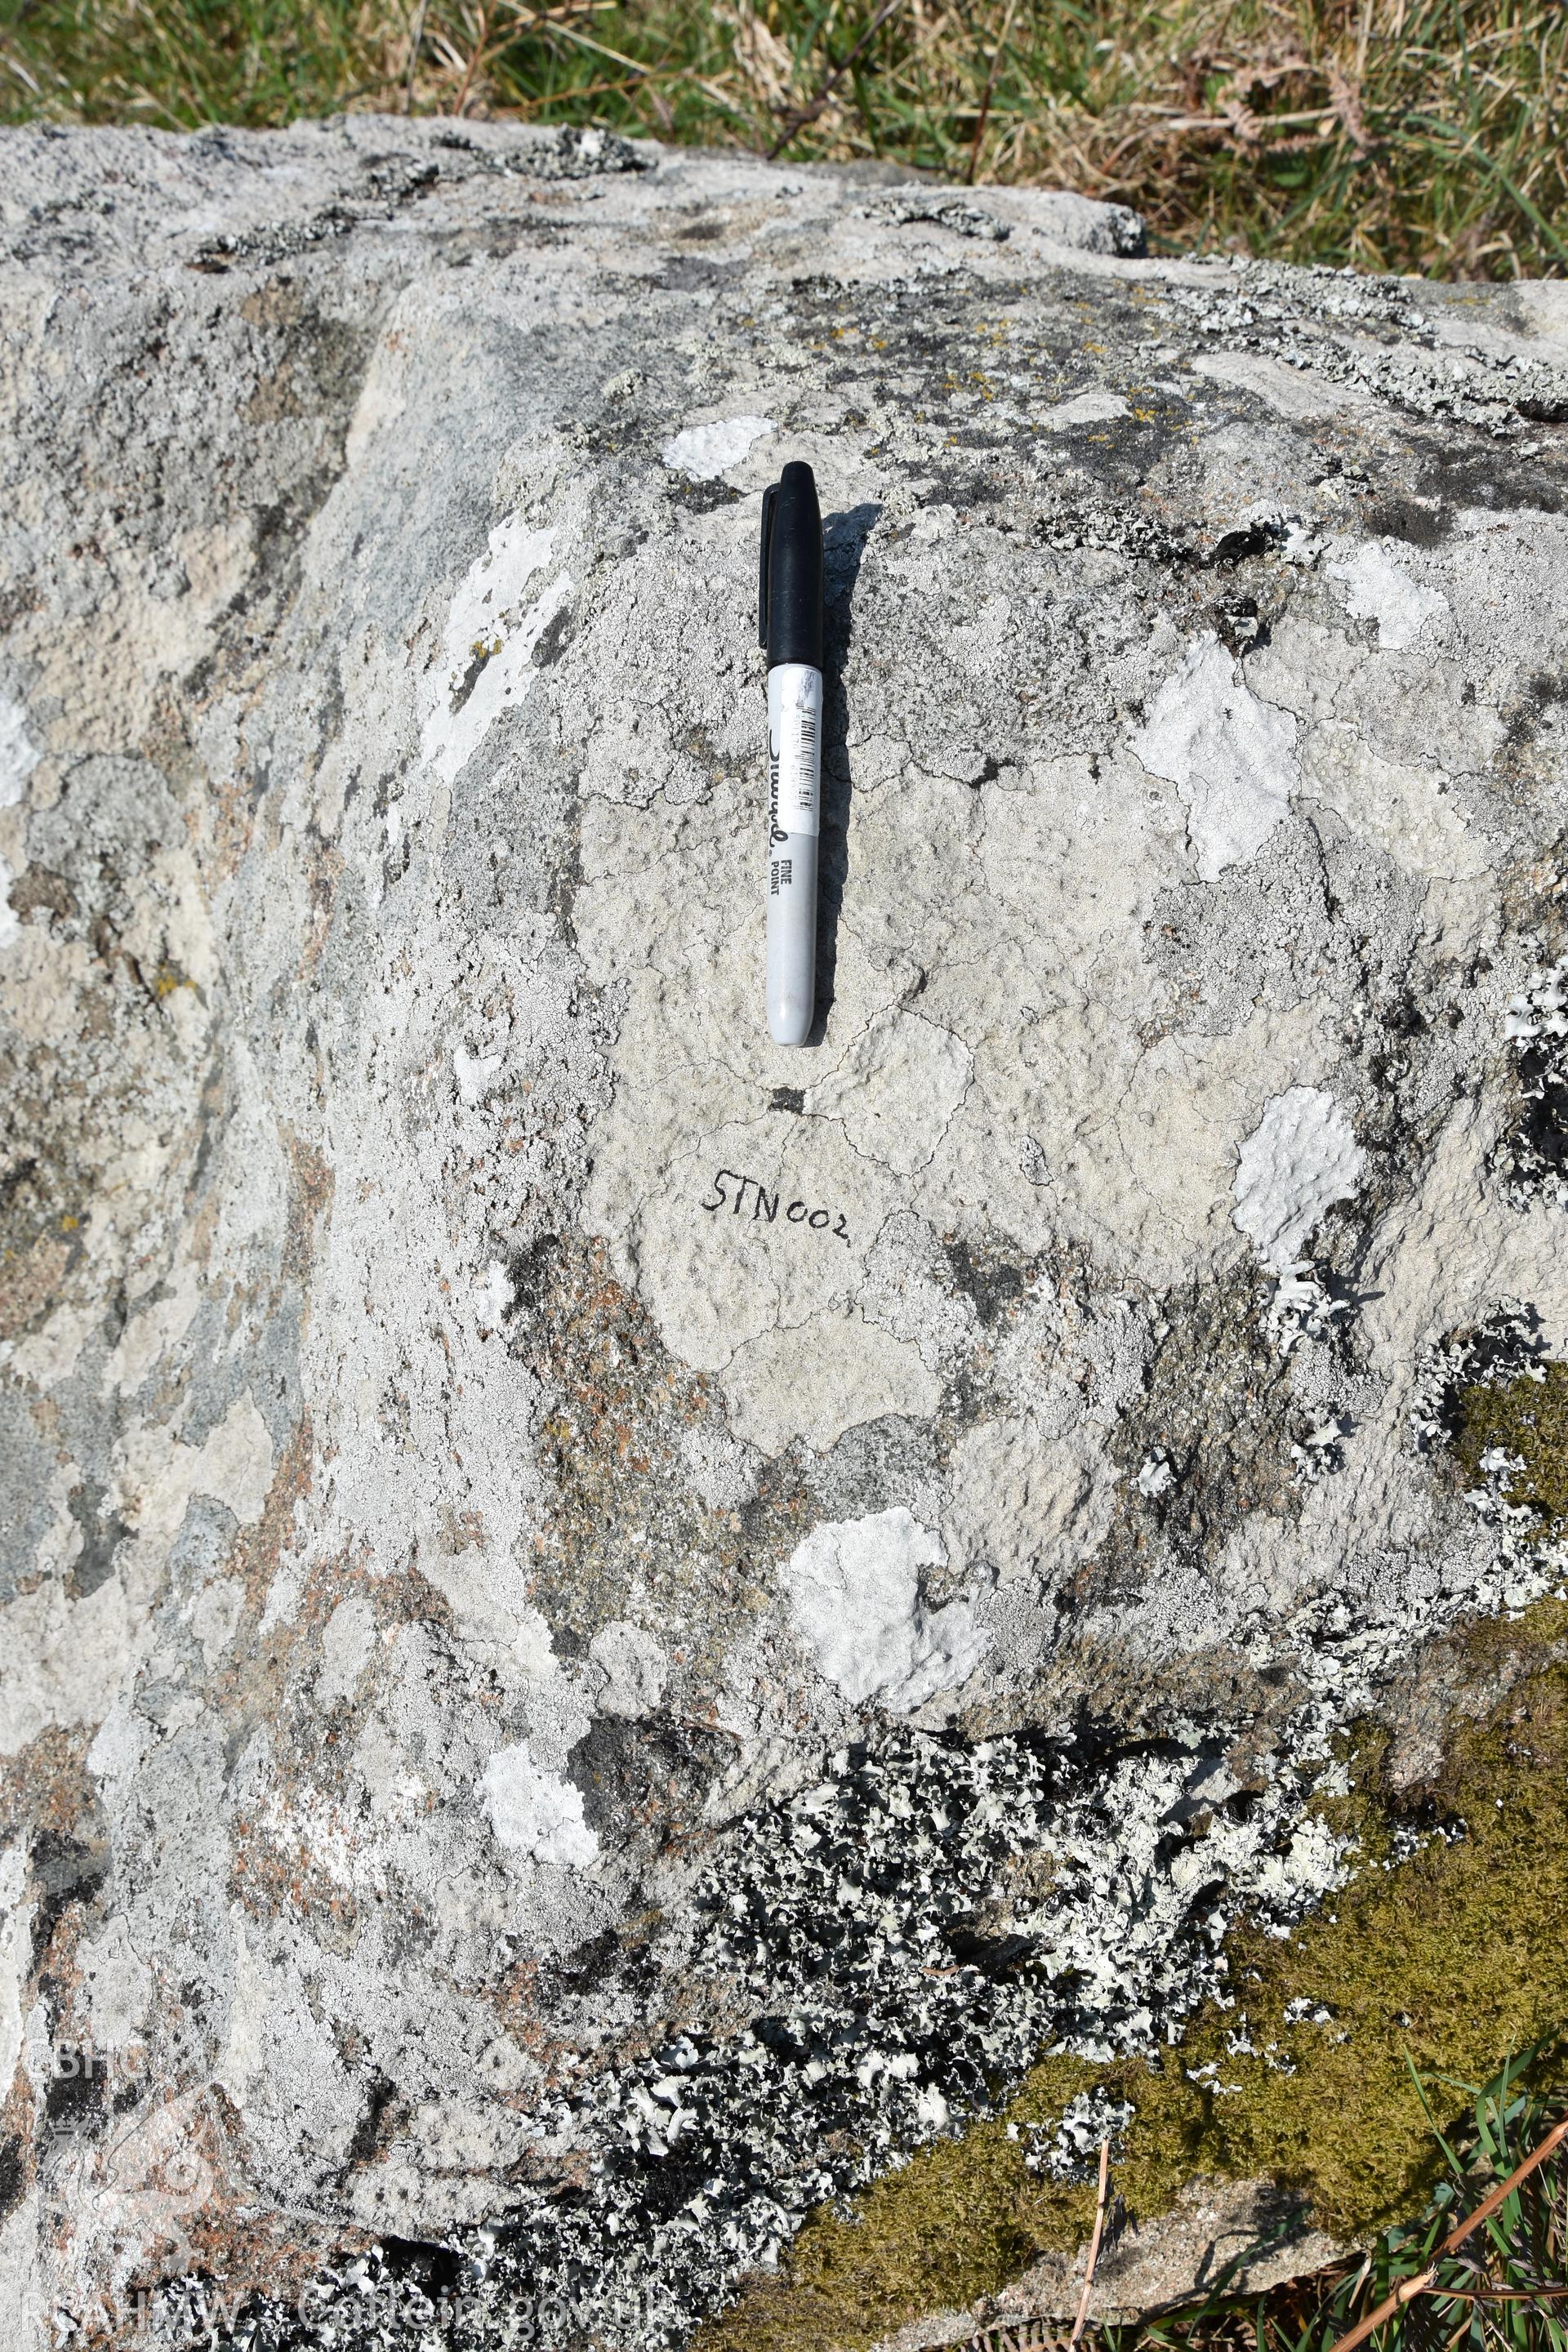 Location of survey marker indicated by a pen Taken by Dr Toby Driver. Produced with EU funds through the Ireland Wales Co-operation Programme 2014-2023. All material made freely available through the Open Government Licence.